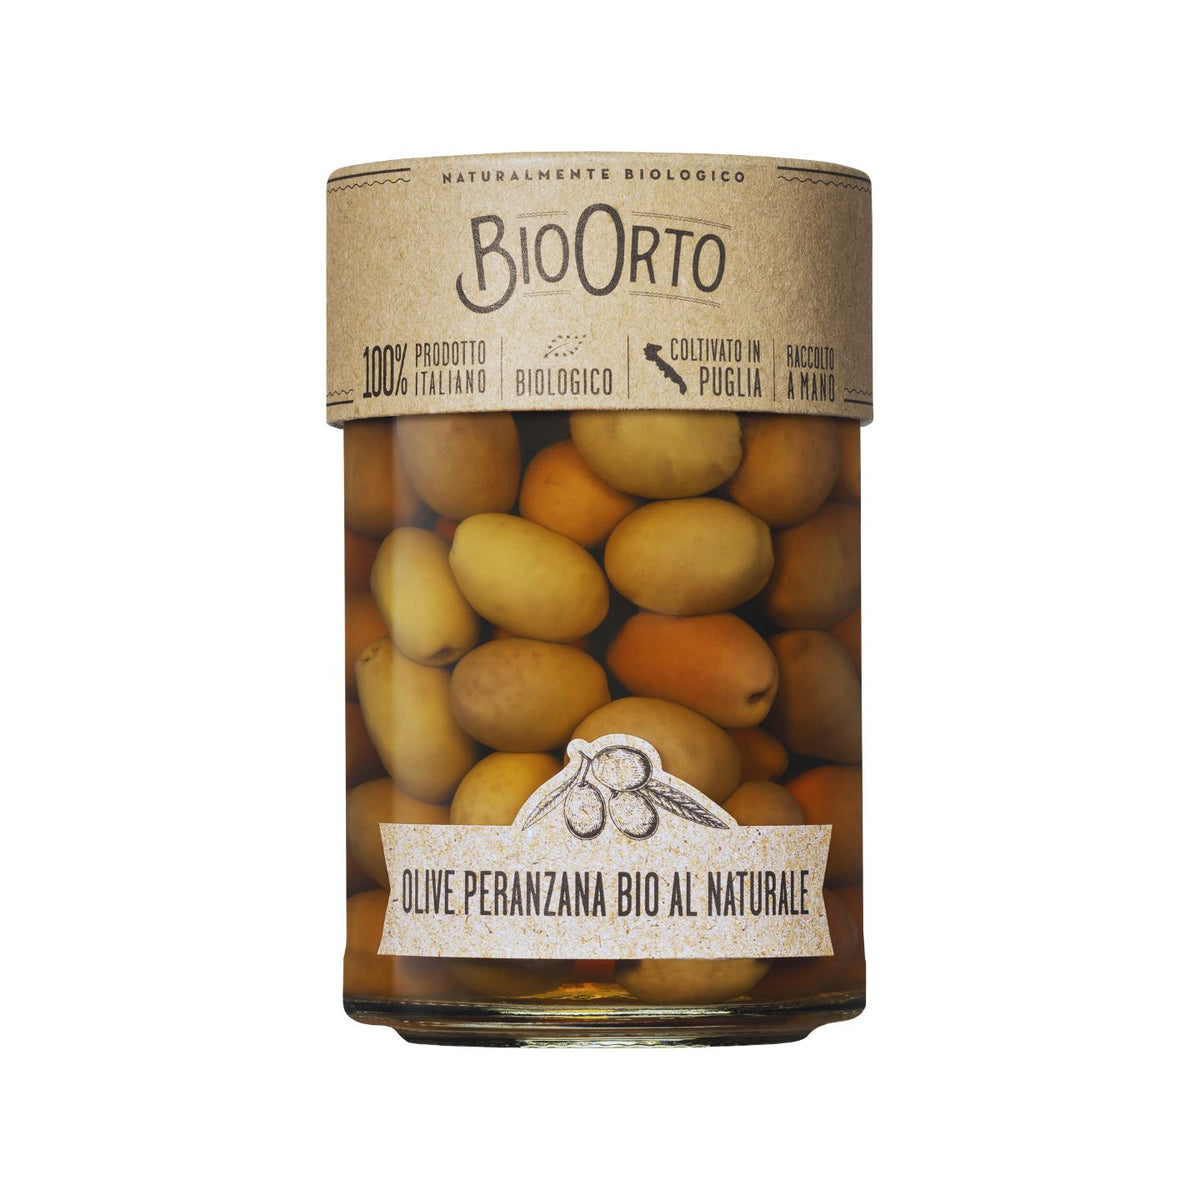 Bio Orto Organic Peranzana Olives in Brine 350g  | Imported and distributed in the UK by Just Gourmet Foods